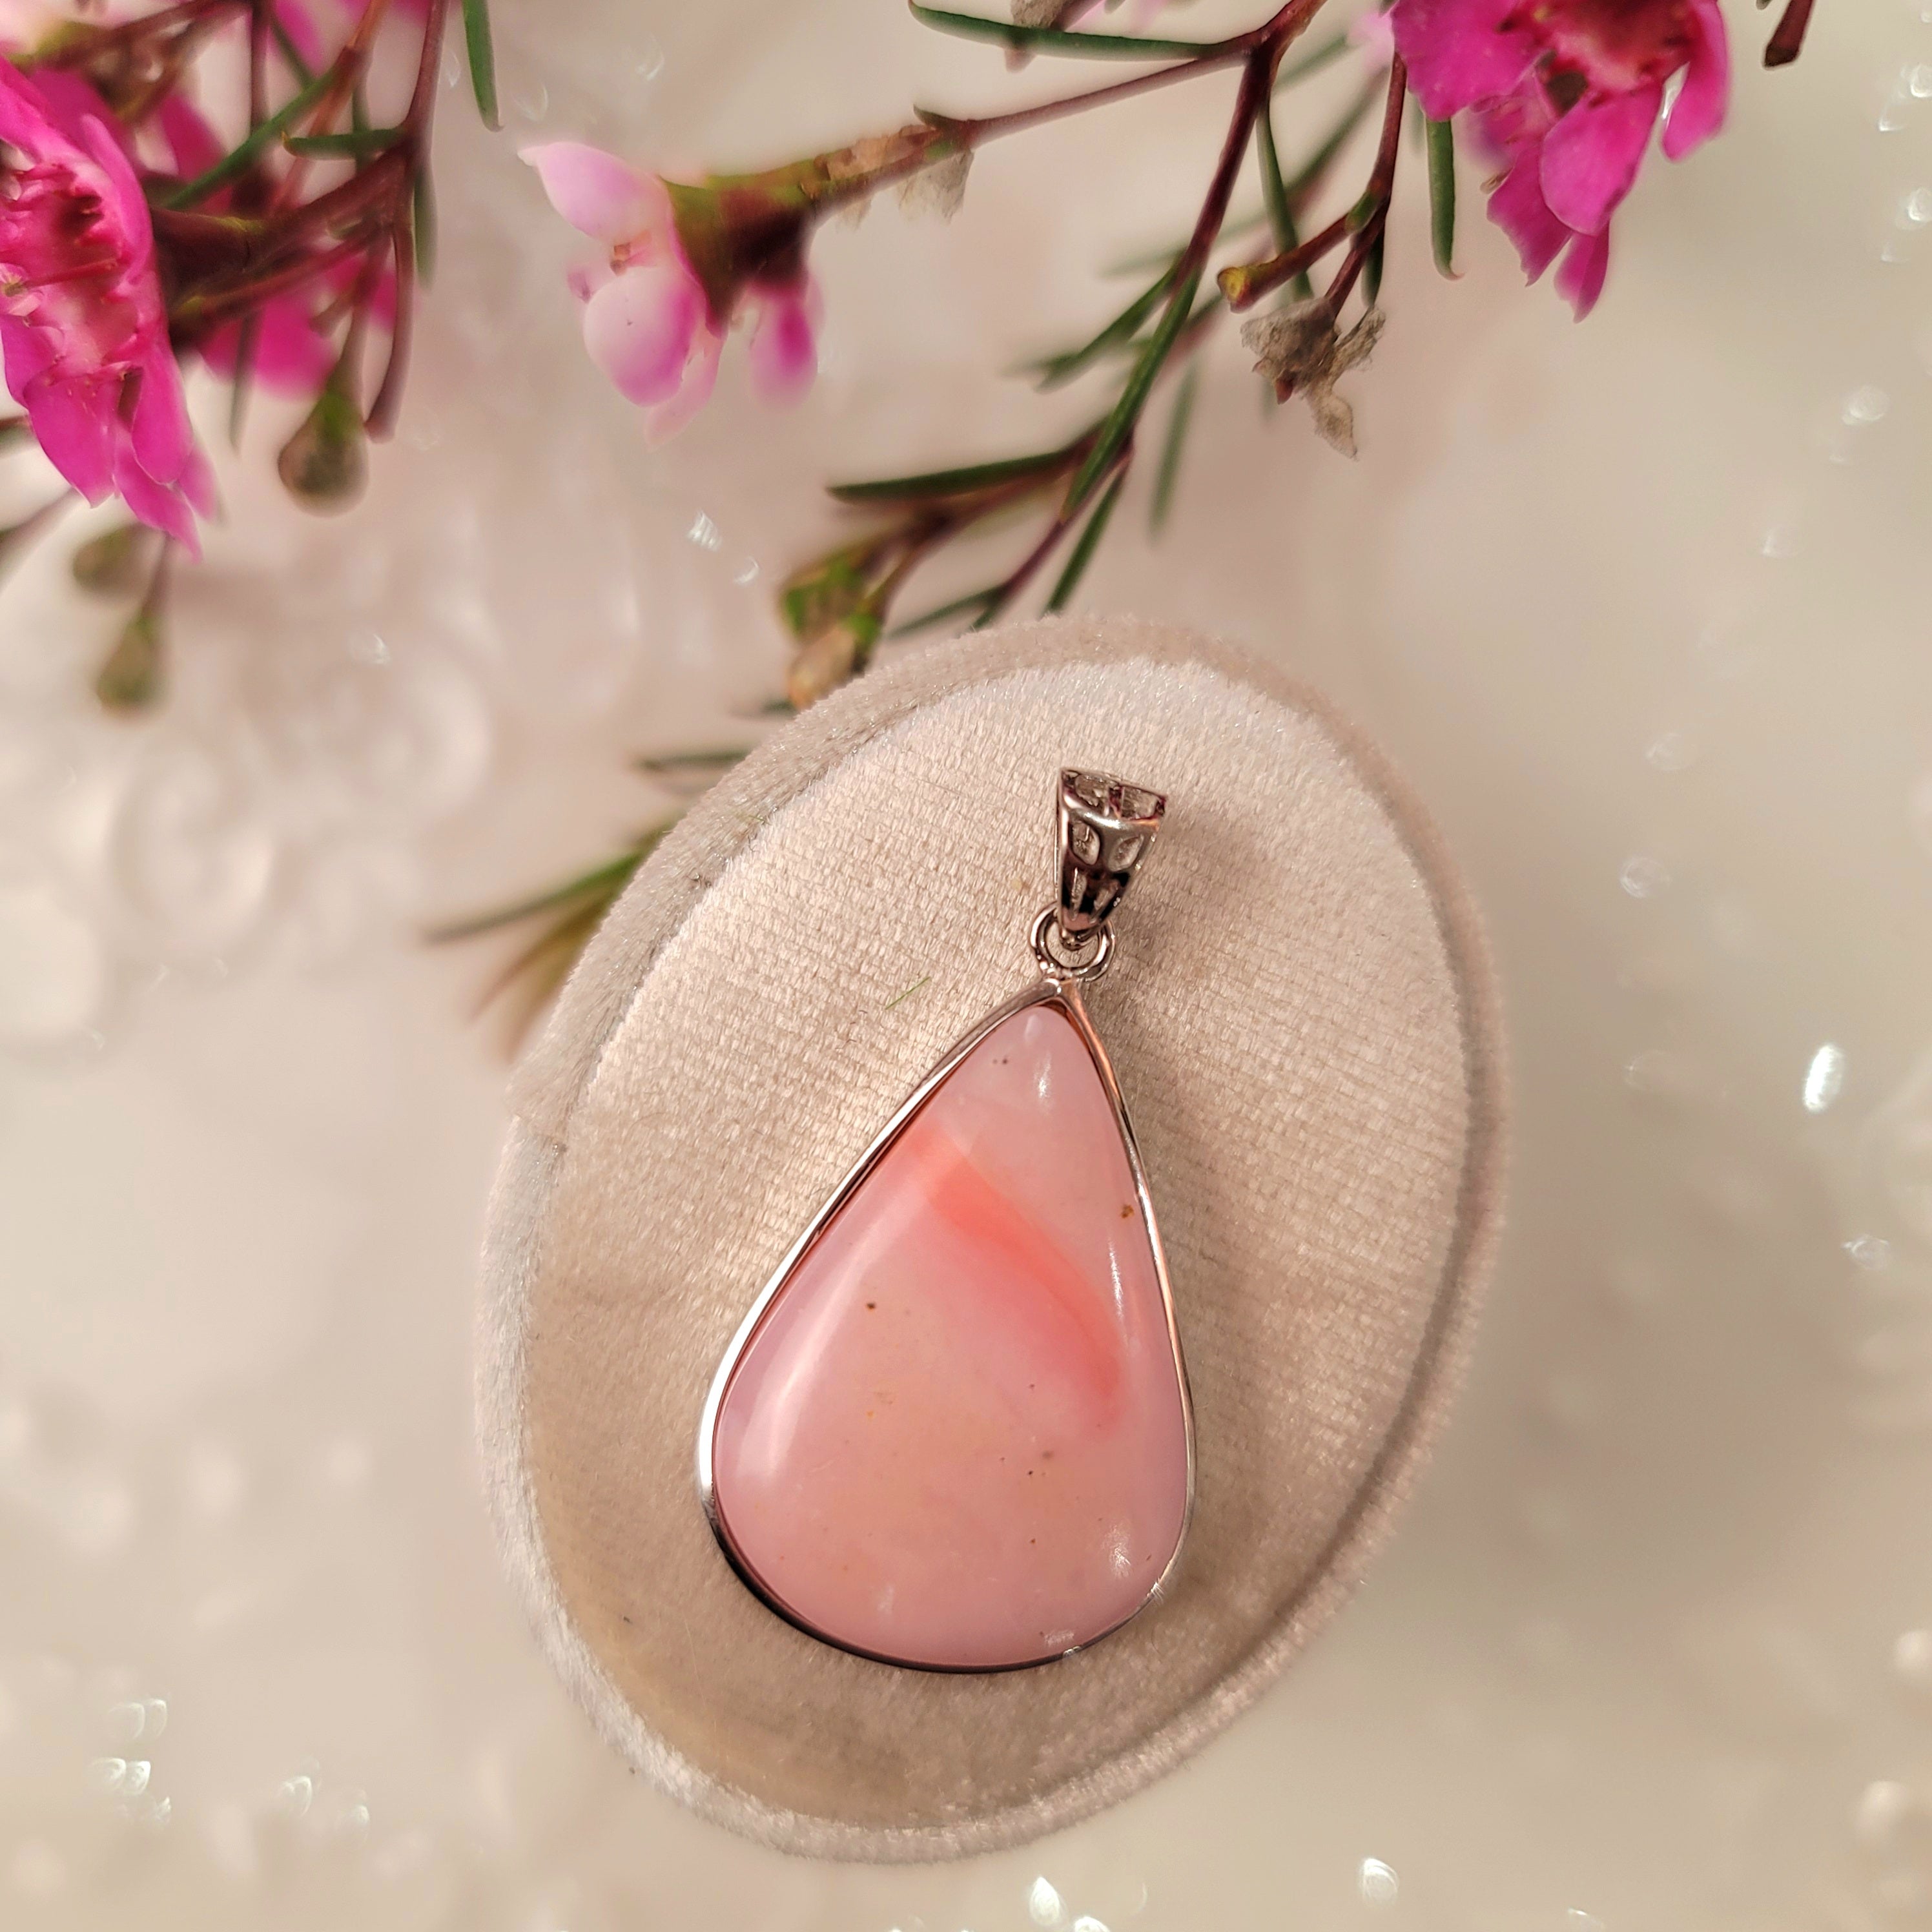 Peruvian Pink Opal Pendant .925 Silver for Love, Romance and Peace